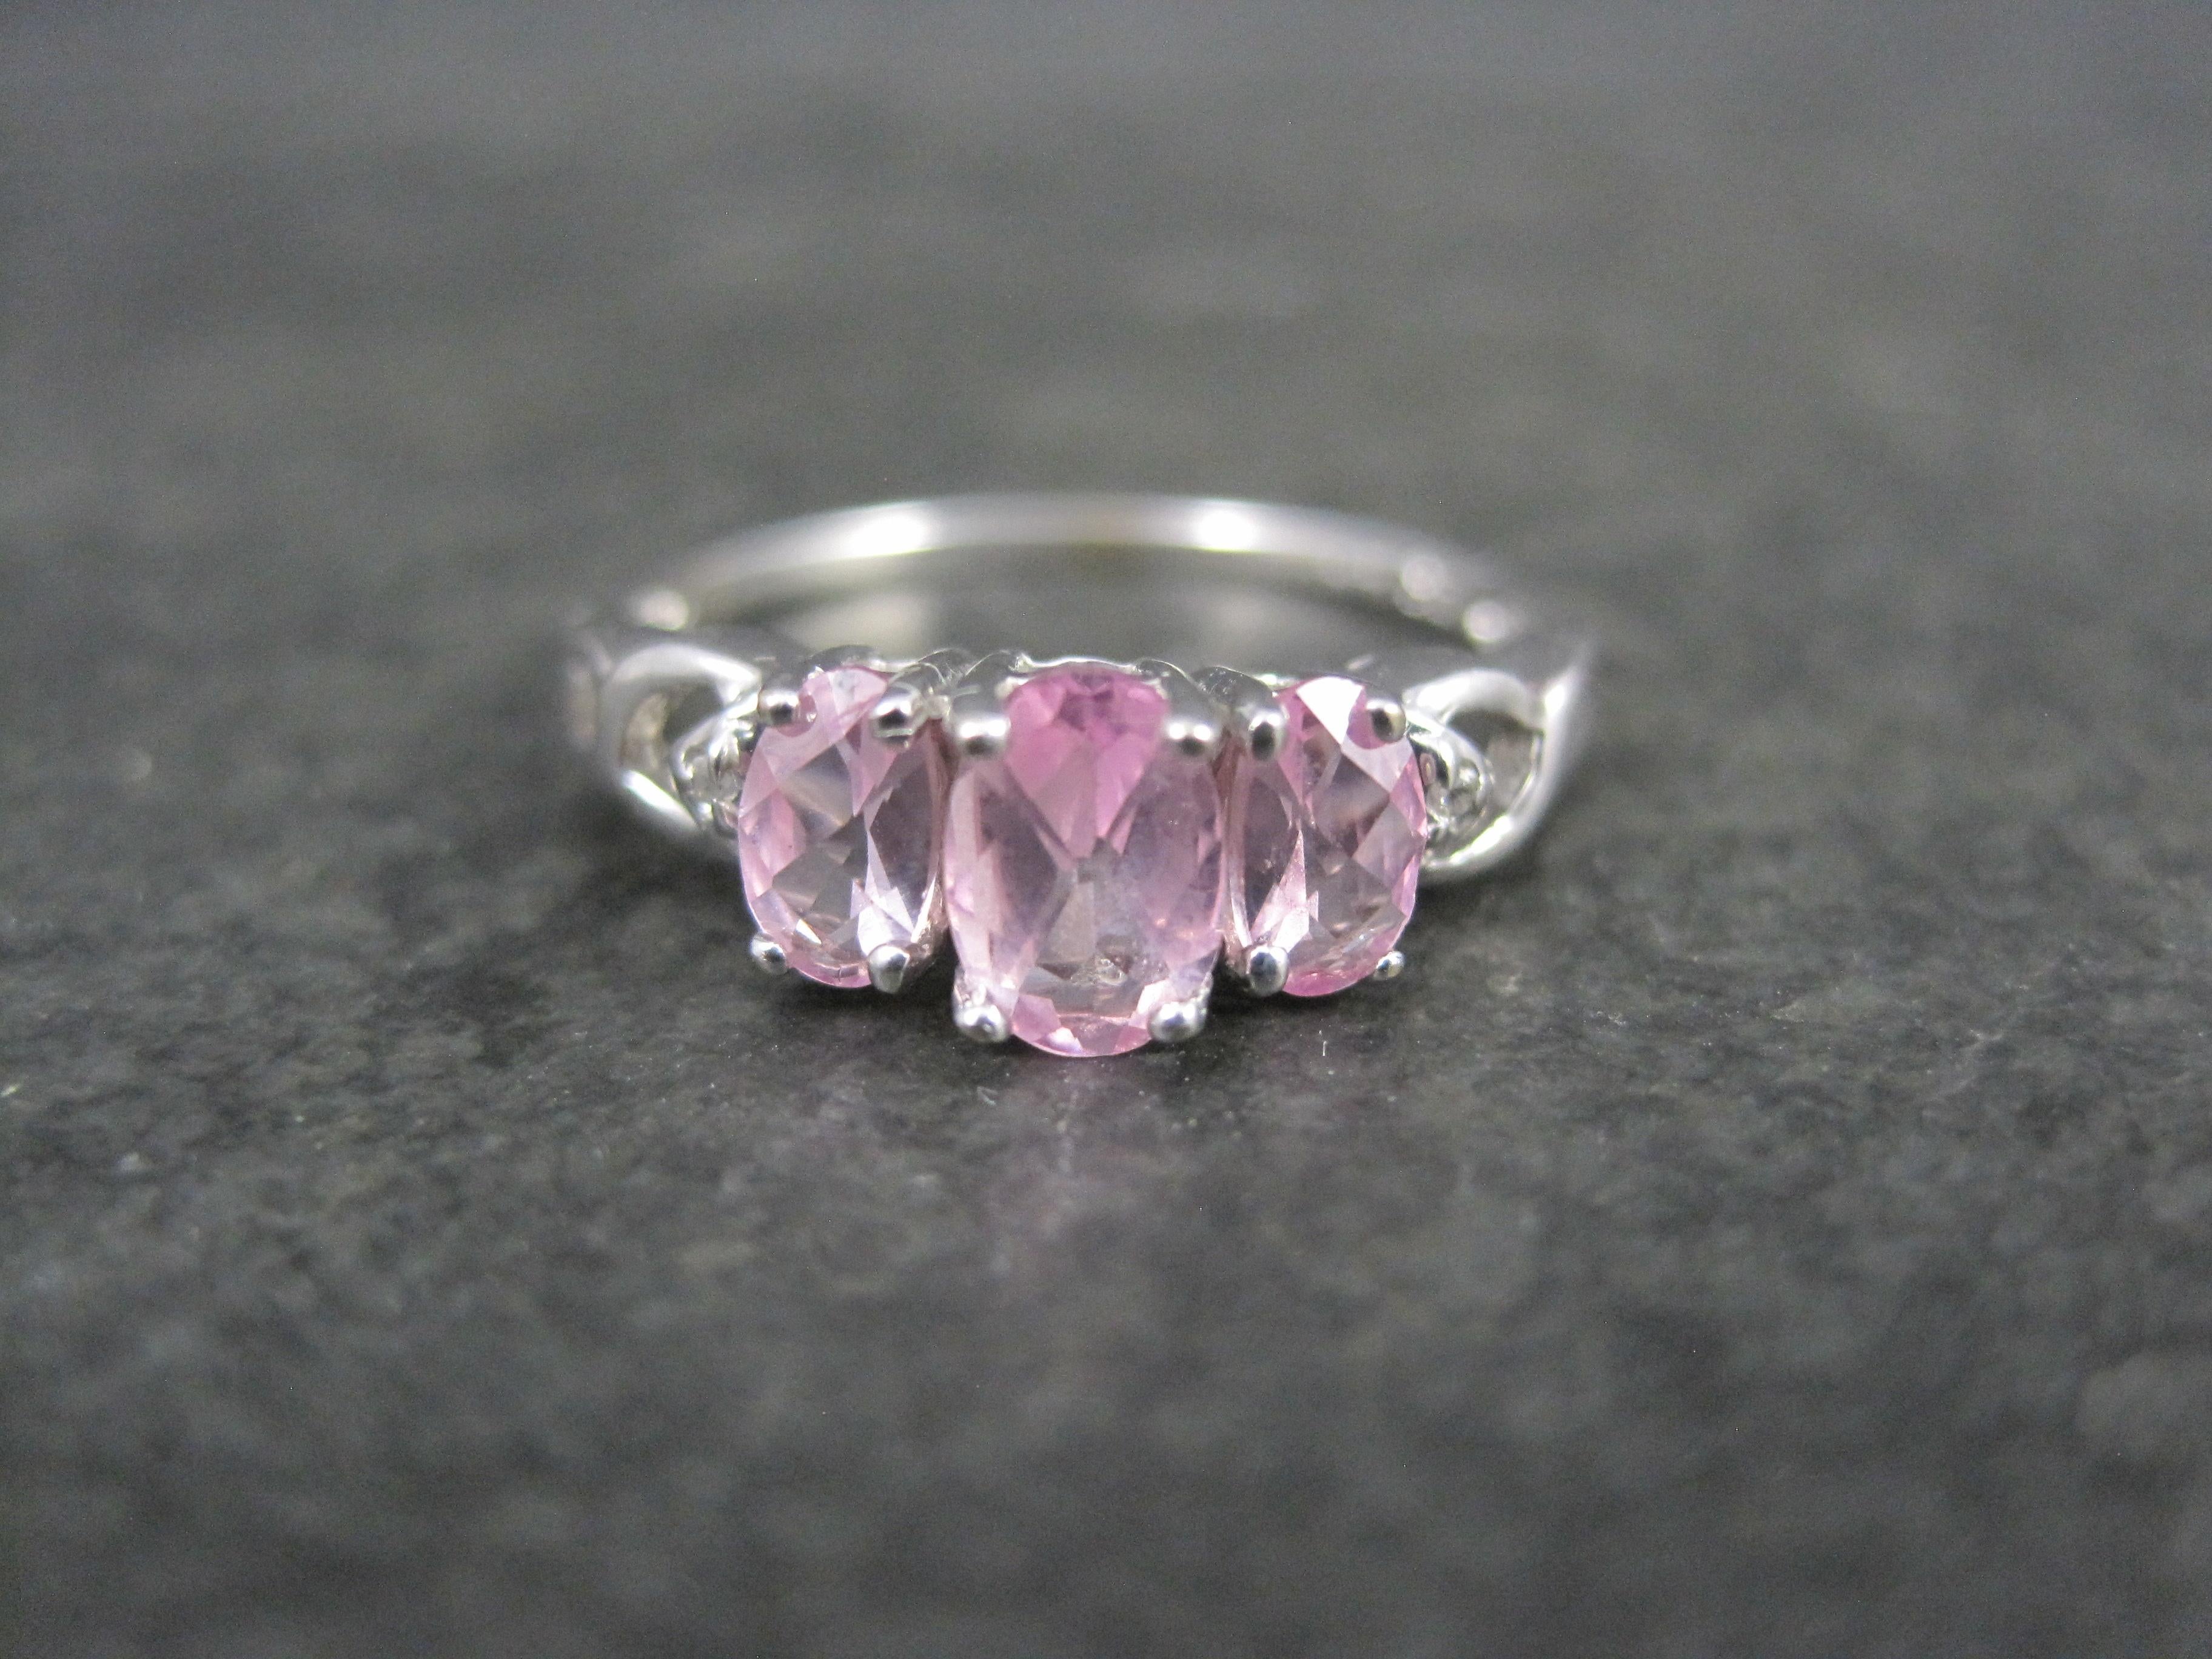 This beautiful, dainty ring is 10K white gold.
It features an estimated .80 carats in oval cut pink topaz and a tiny diamond accent on each side.

The face of this ring measures 1/4 of an inch north to south with a rise of 6mm off the finger.
Size: